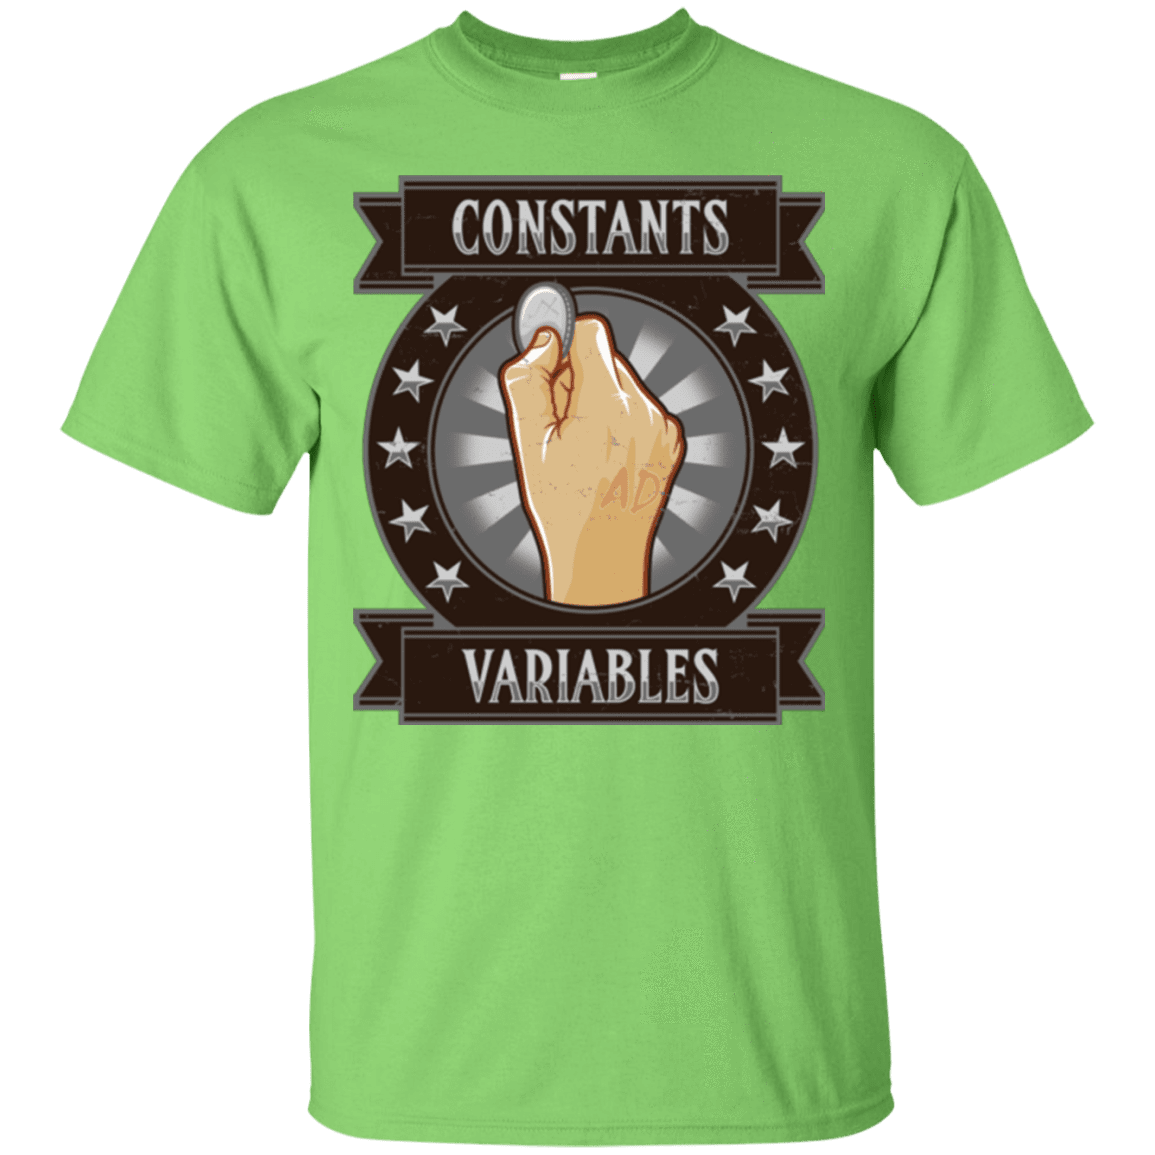 T-Shirts Lime / Small CONSTANTS AND VARIABLES T-Shirt